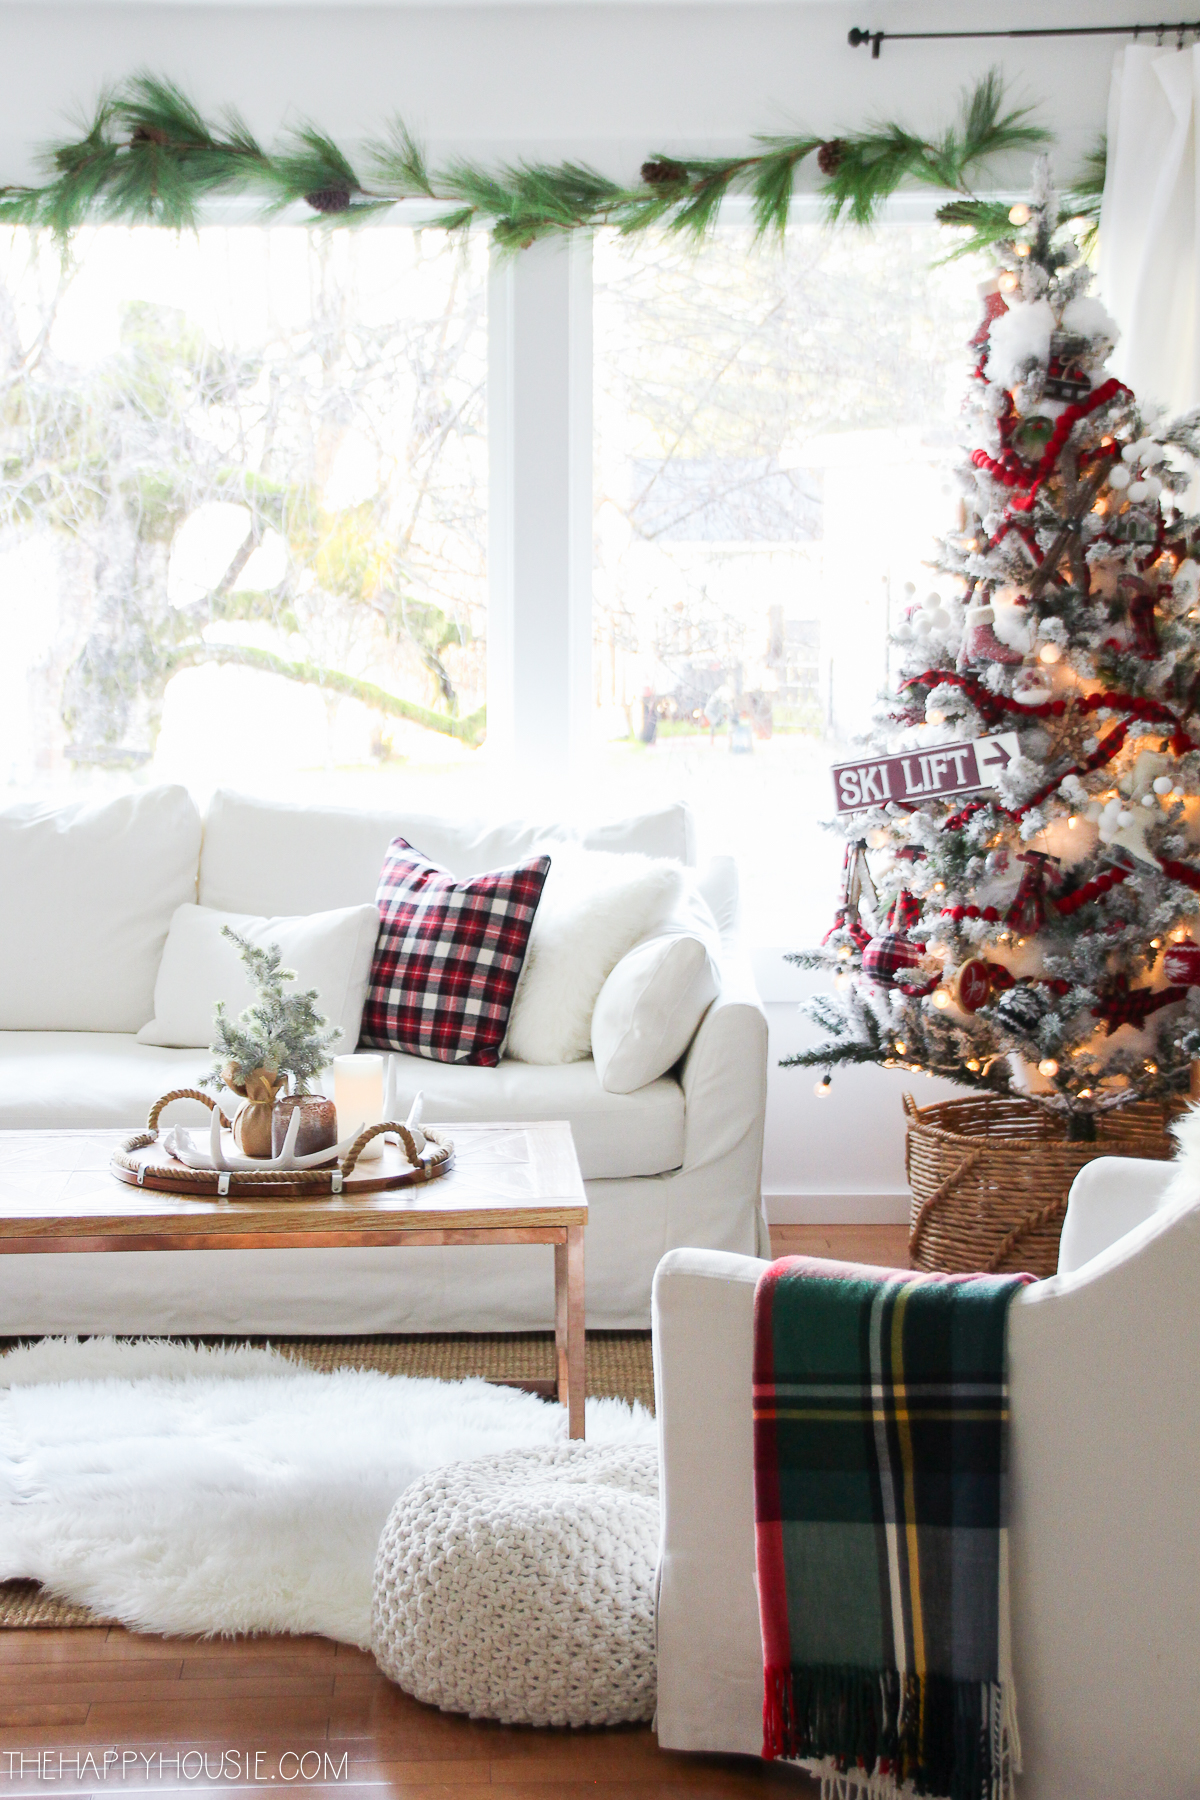 https://www.thehappyhousie.com/wp-content/uploads/2018/12/red-and-white-christmas-decorating-ideas-christmas-living-room-tour-at-the-happy-housie-39.jpg